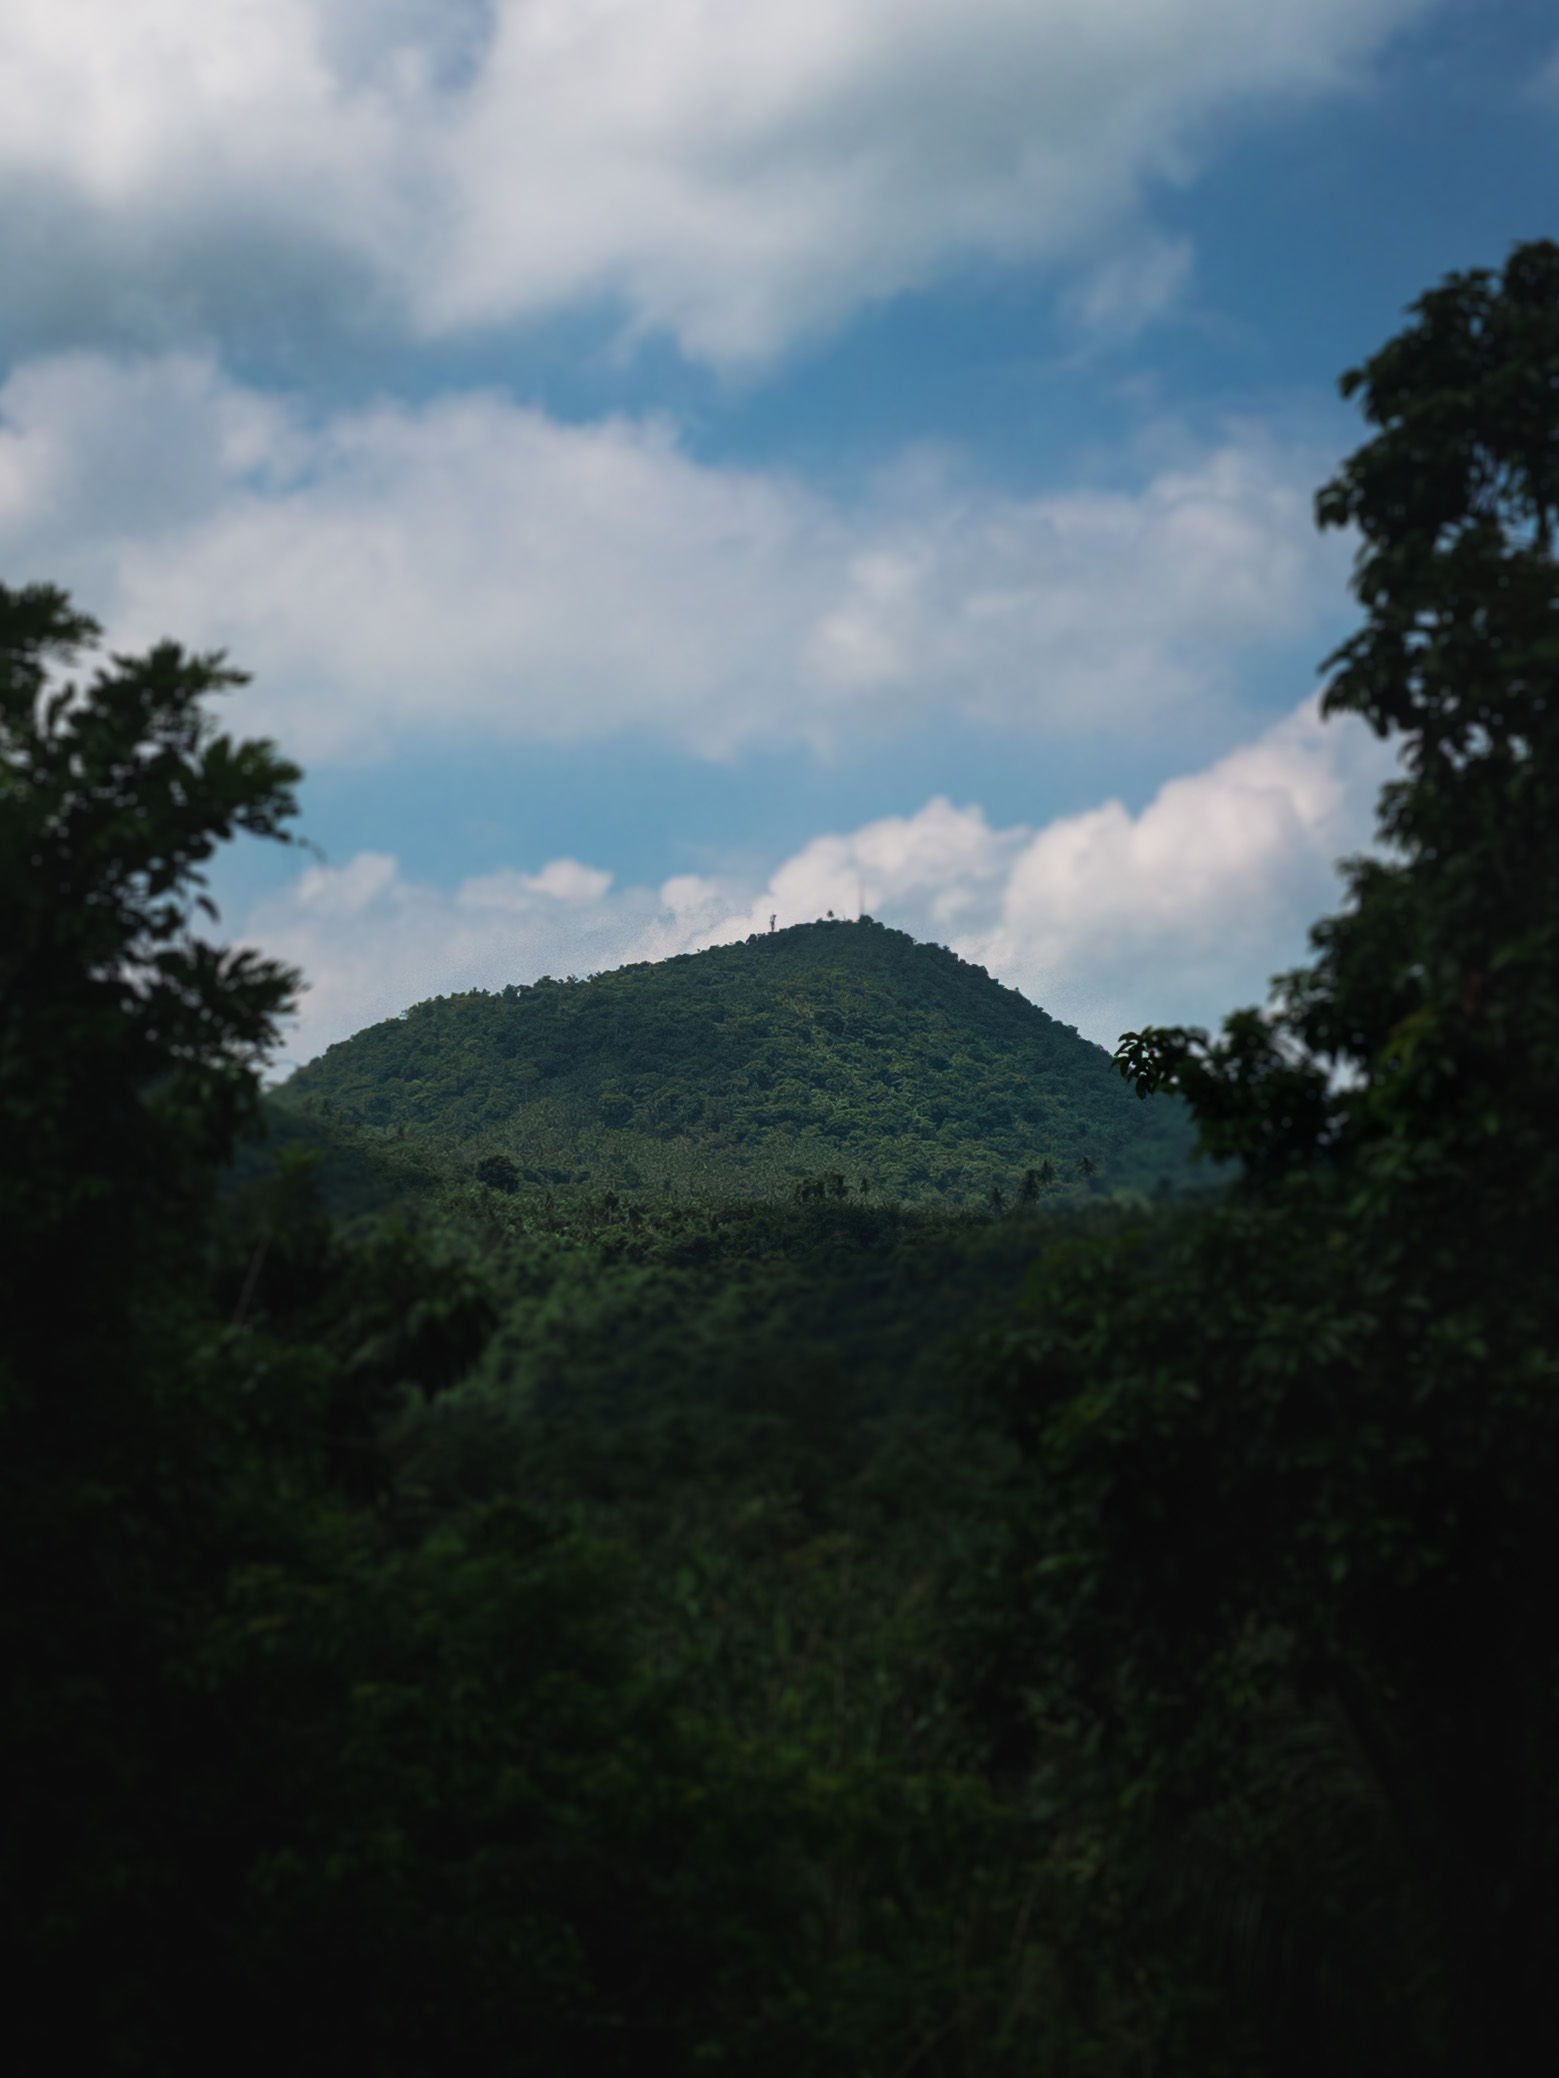 One of the three peaks of Mt. Banahaw